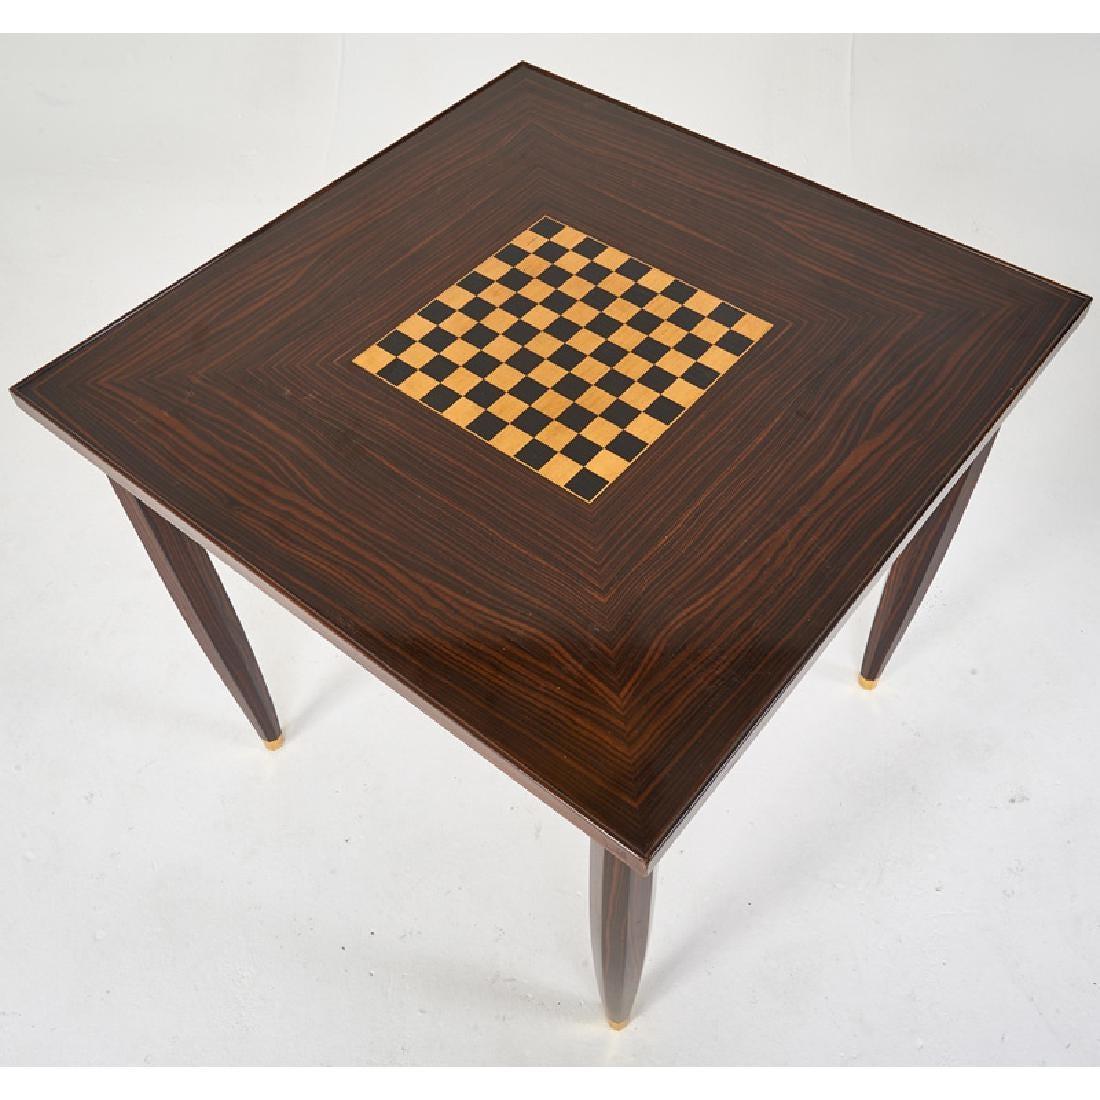 Elegant French game table in Macassar and ebony wood with an inset chest board.
with gilded brass feet signed 